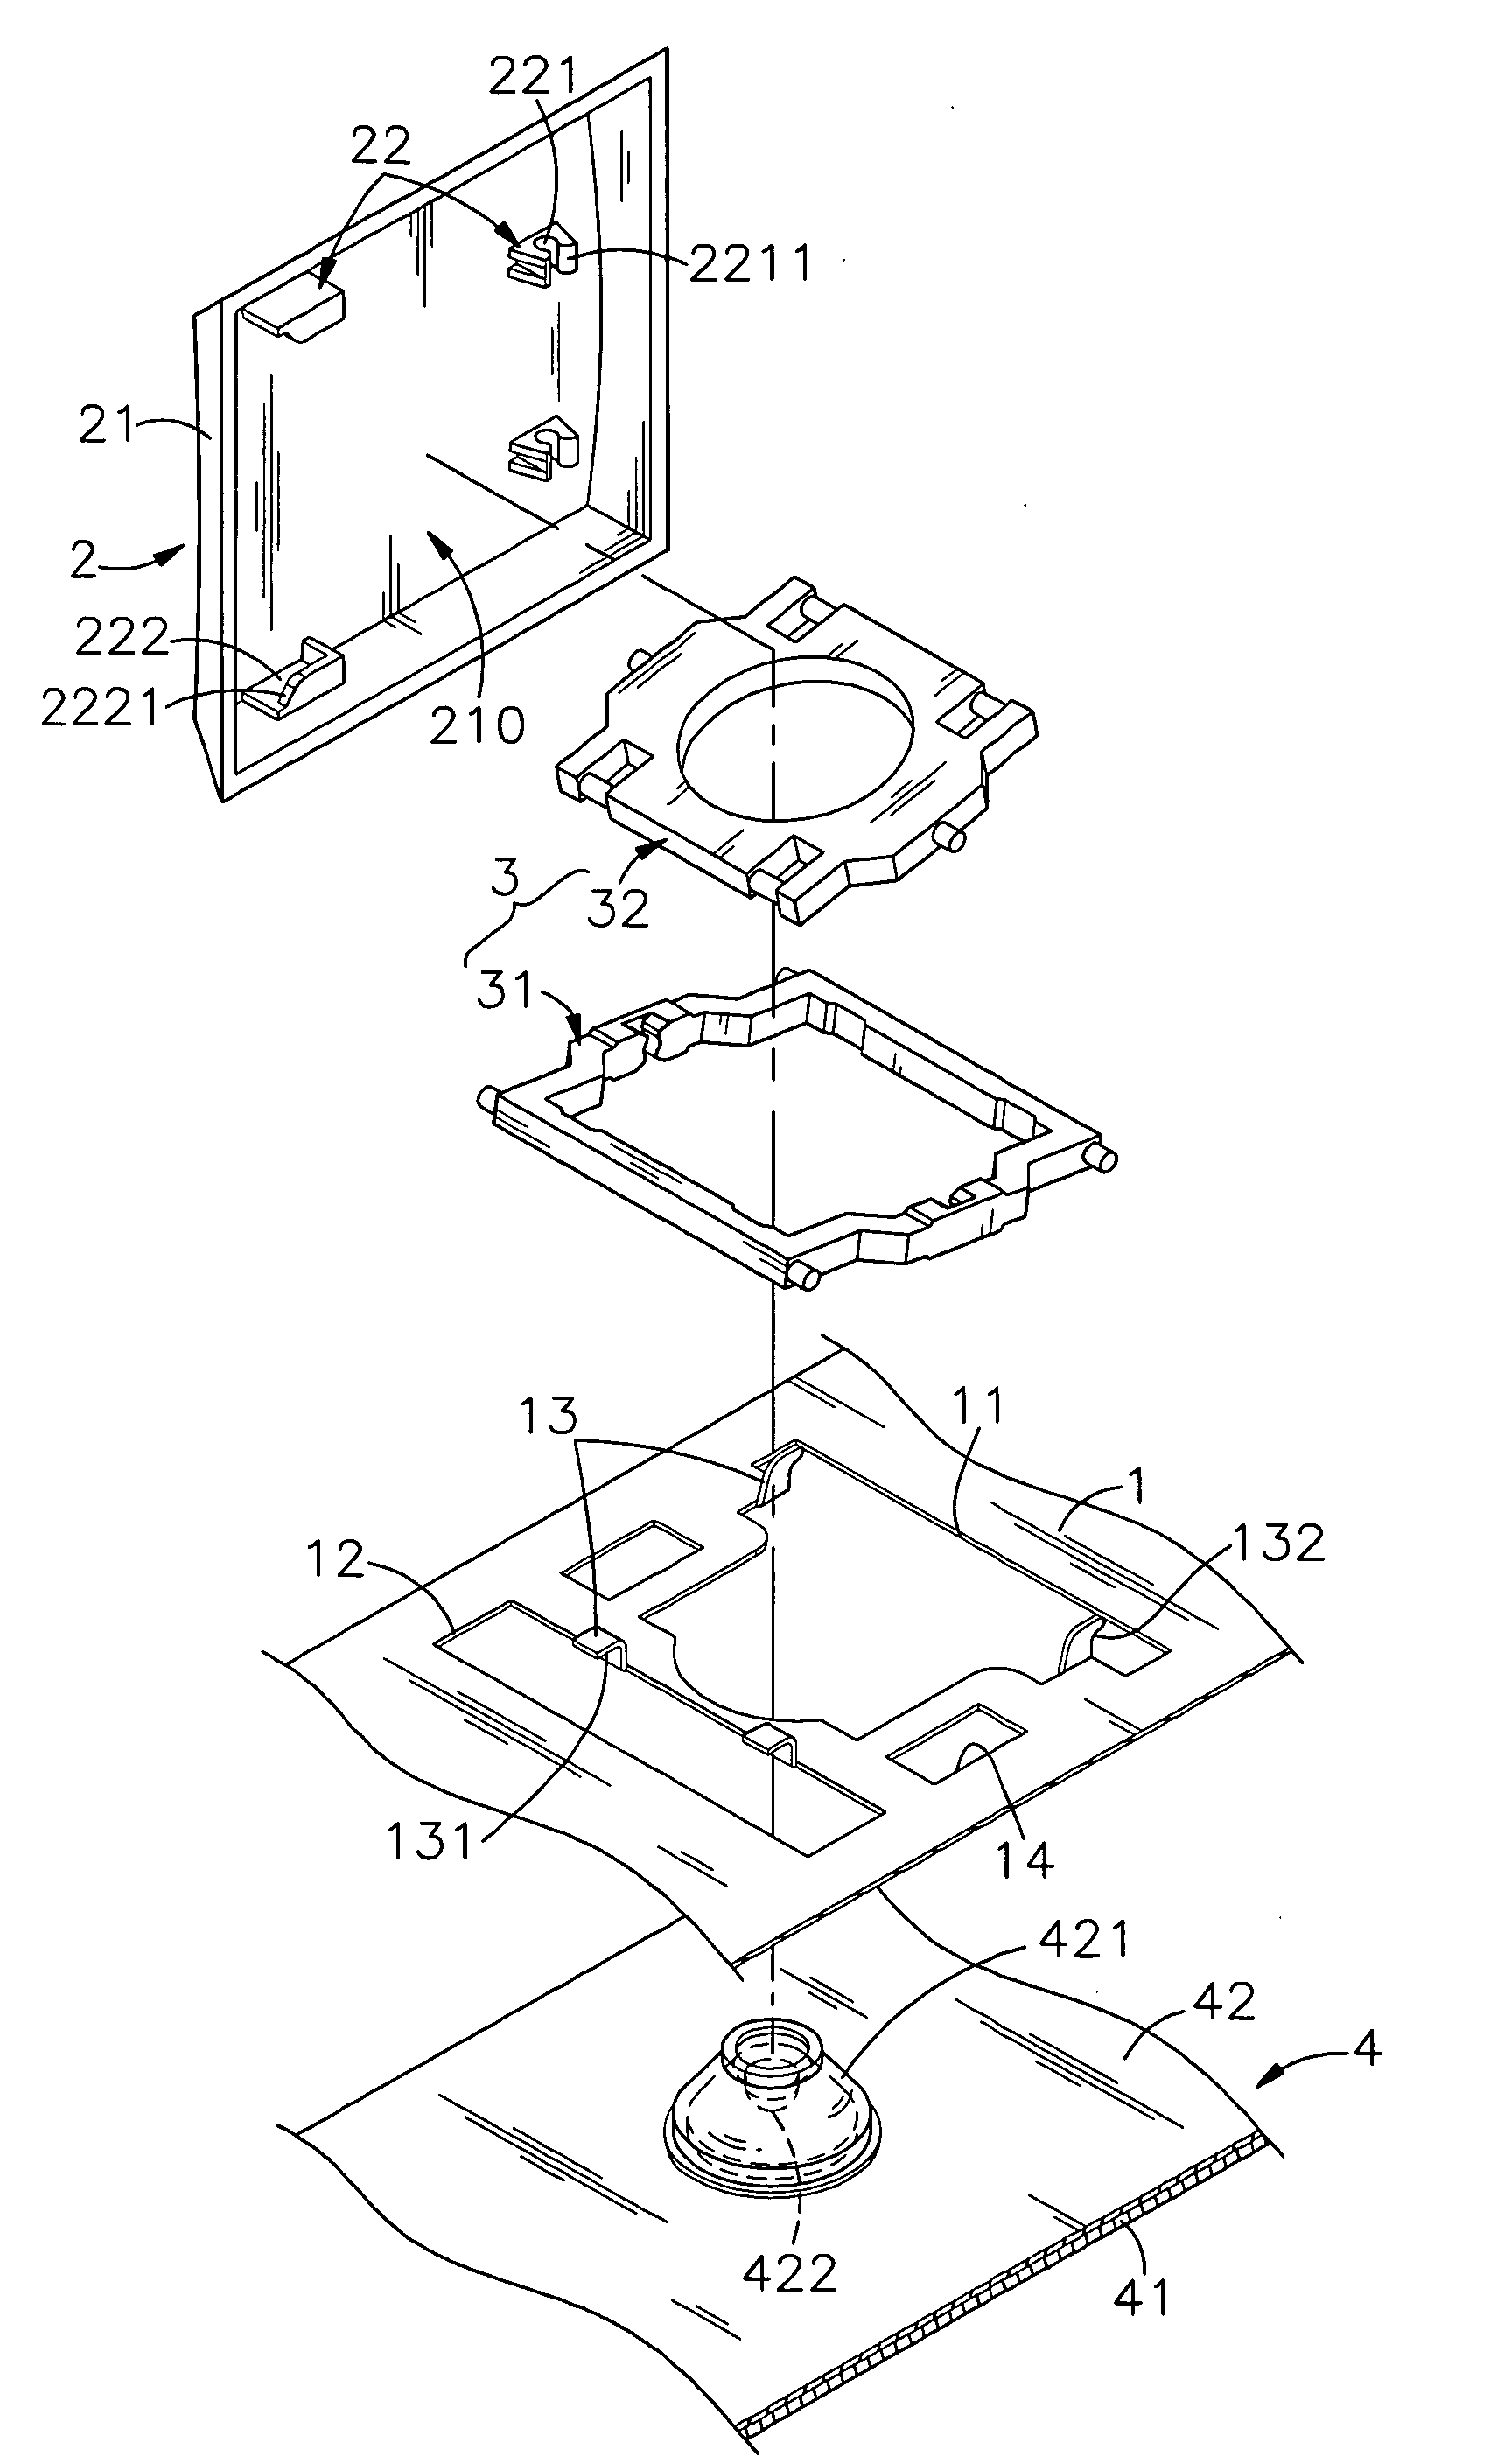 Linking mechanism for key switch assembly